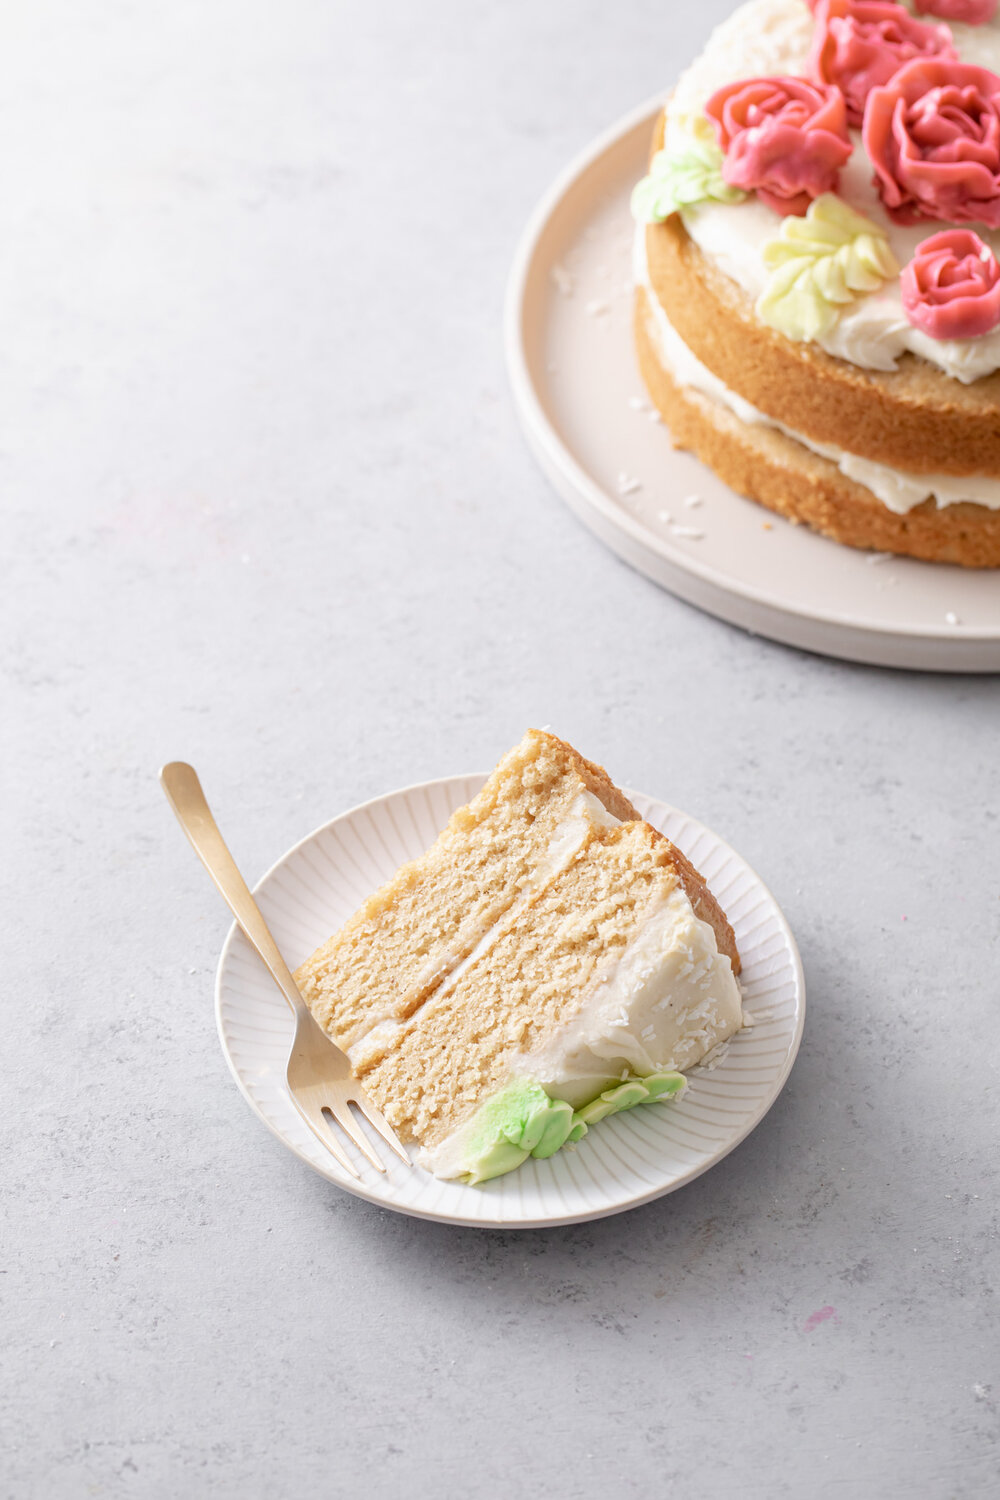 Almond layer cake with swirls of cream cheese frosting.  The perfect two-layer "naked" cake for spring!